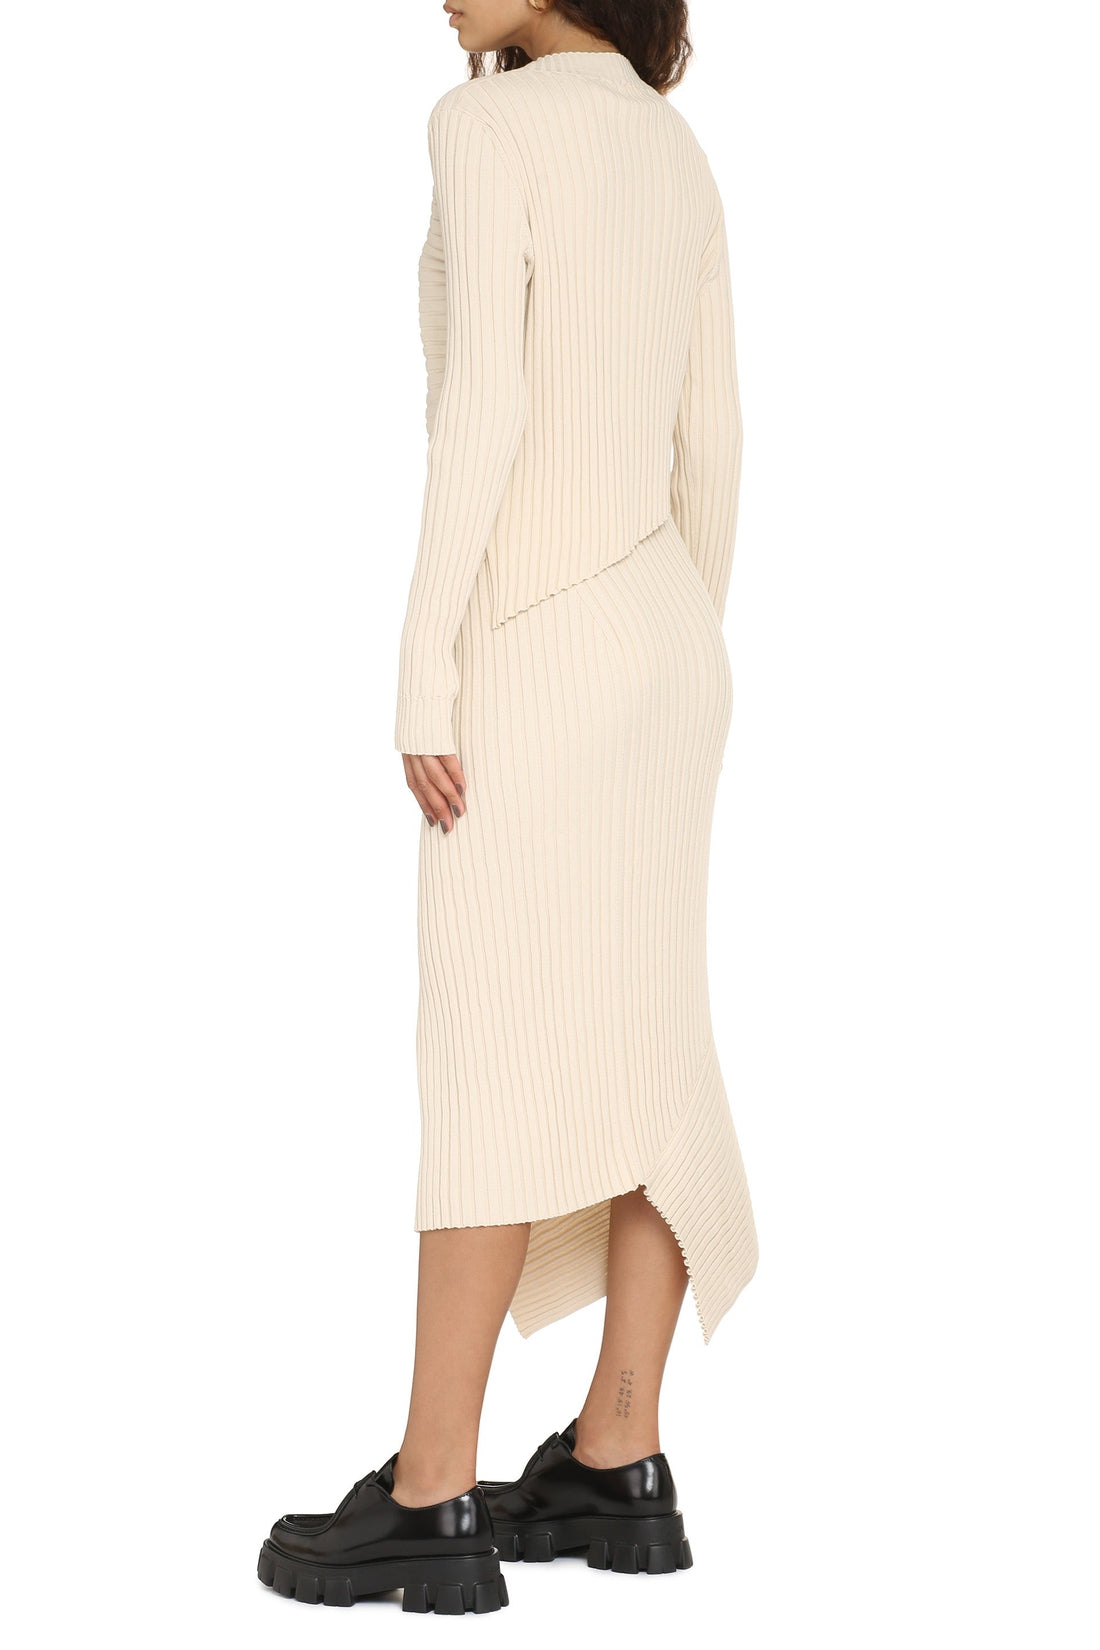 Stella McCartney-OUTLET-SALE-Ribbed cotton sweater-ARCHIVIST